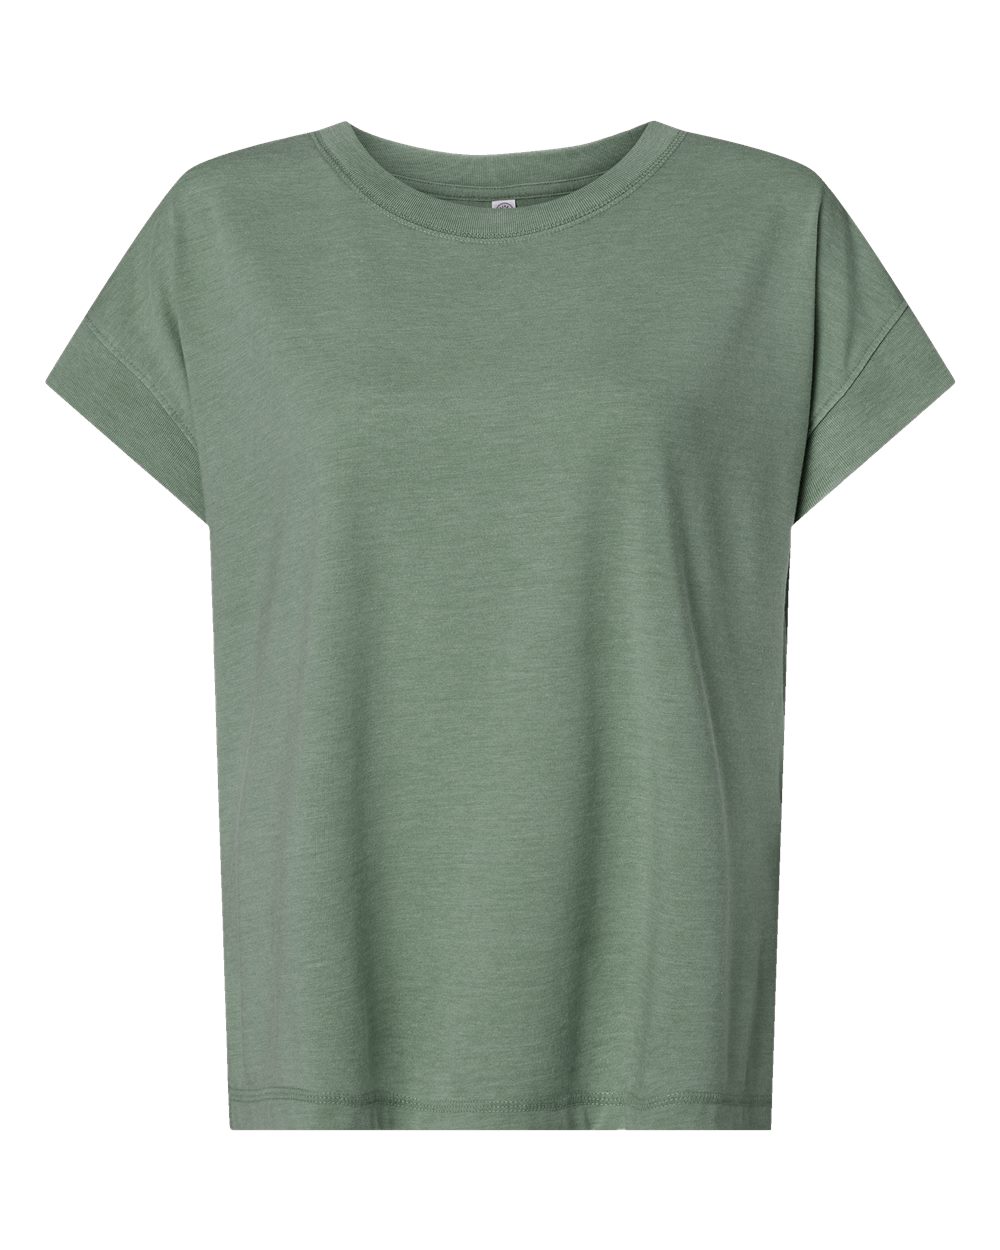 LAT 3502 - Women's Relaxed Vintage Wash Tee